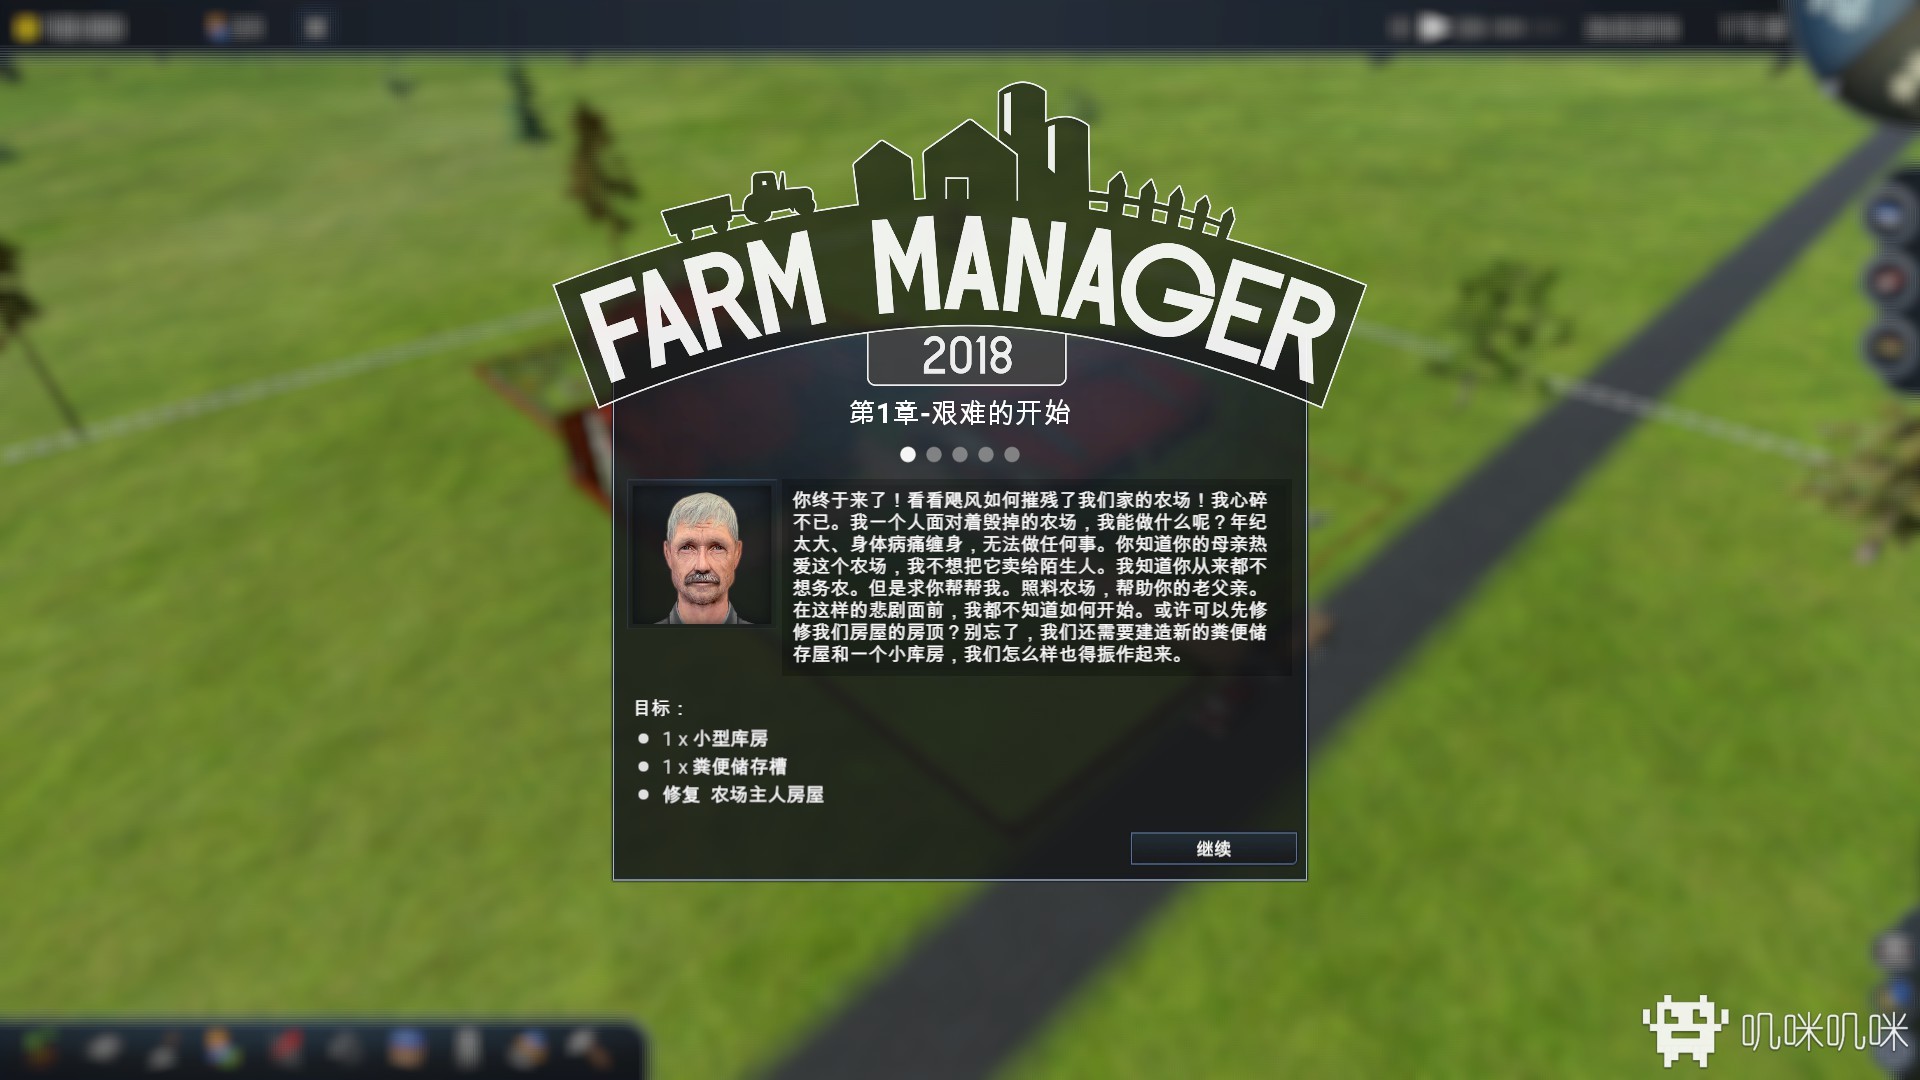 Farm Manager 2018 - Brewing & Winemaking DLC游戏评测20190807001